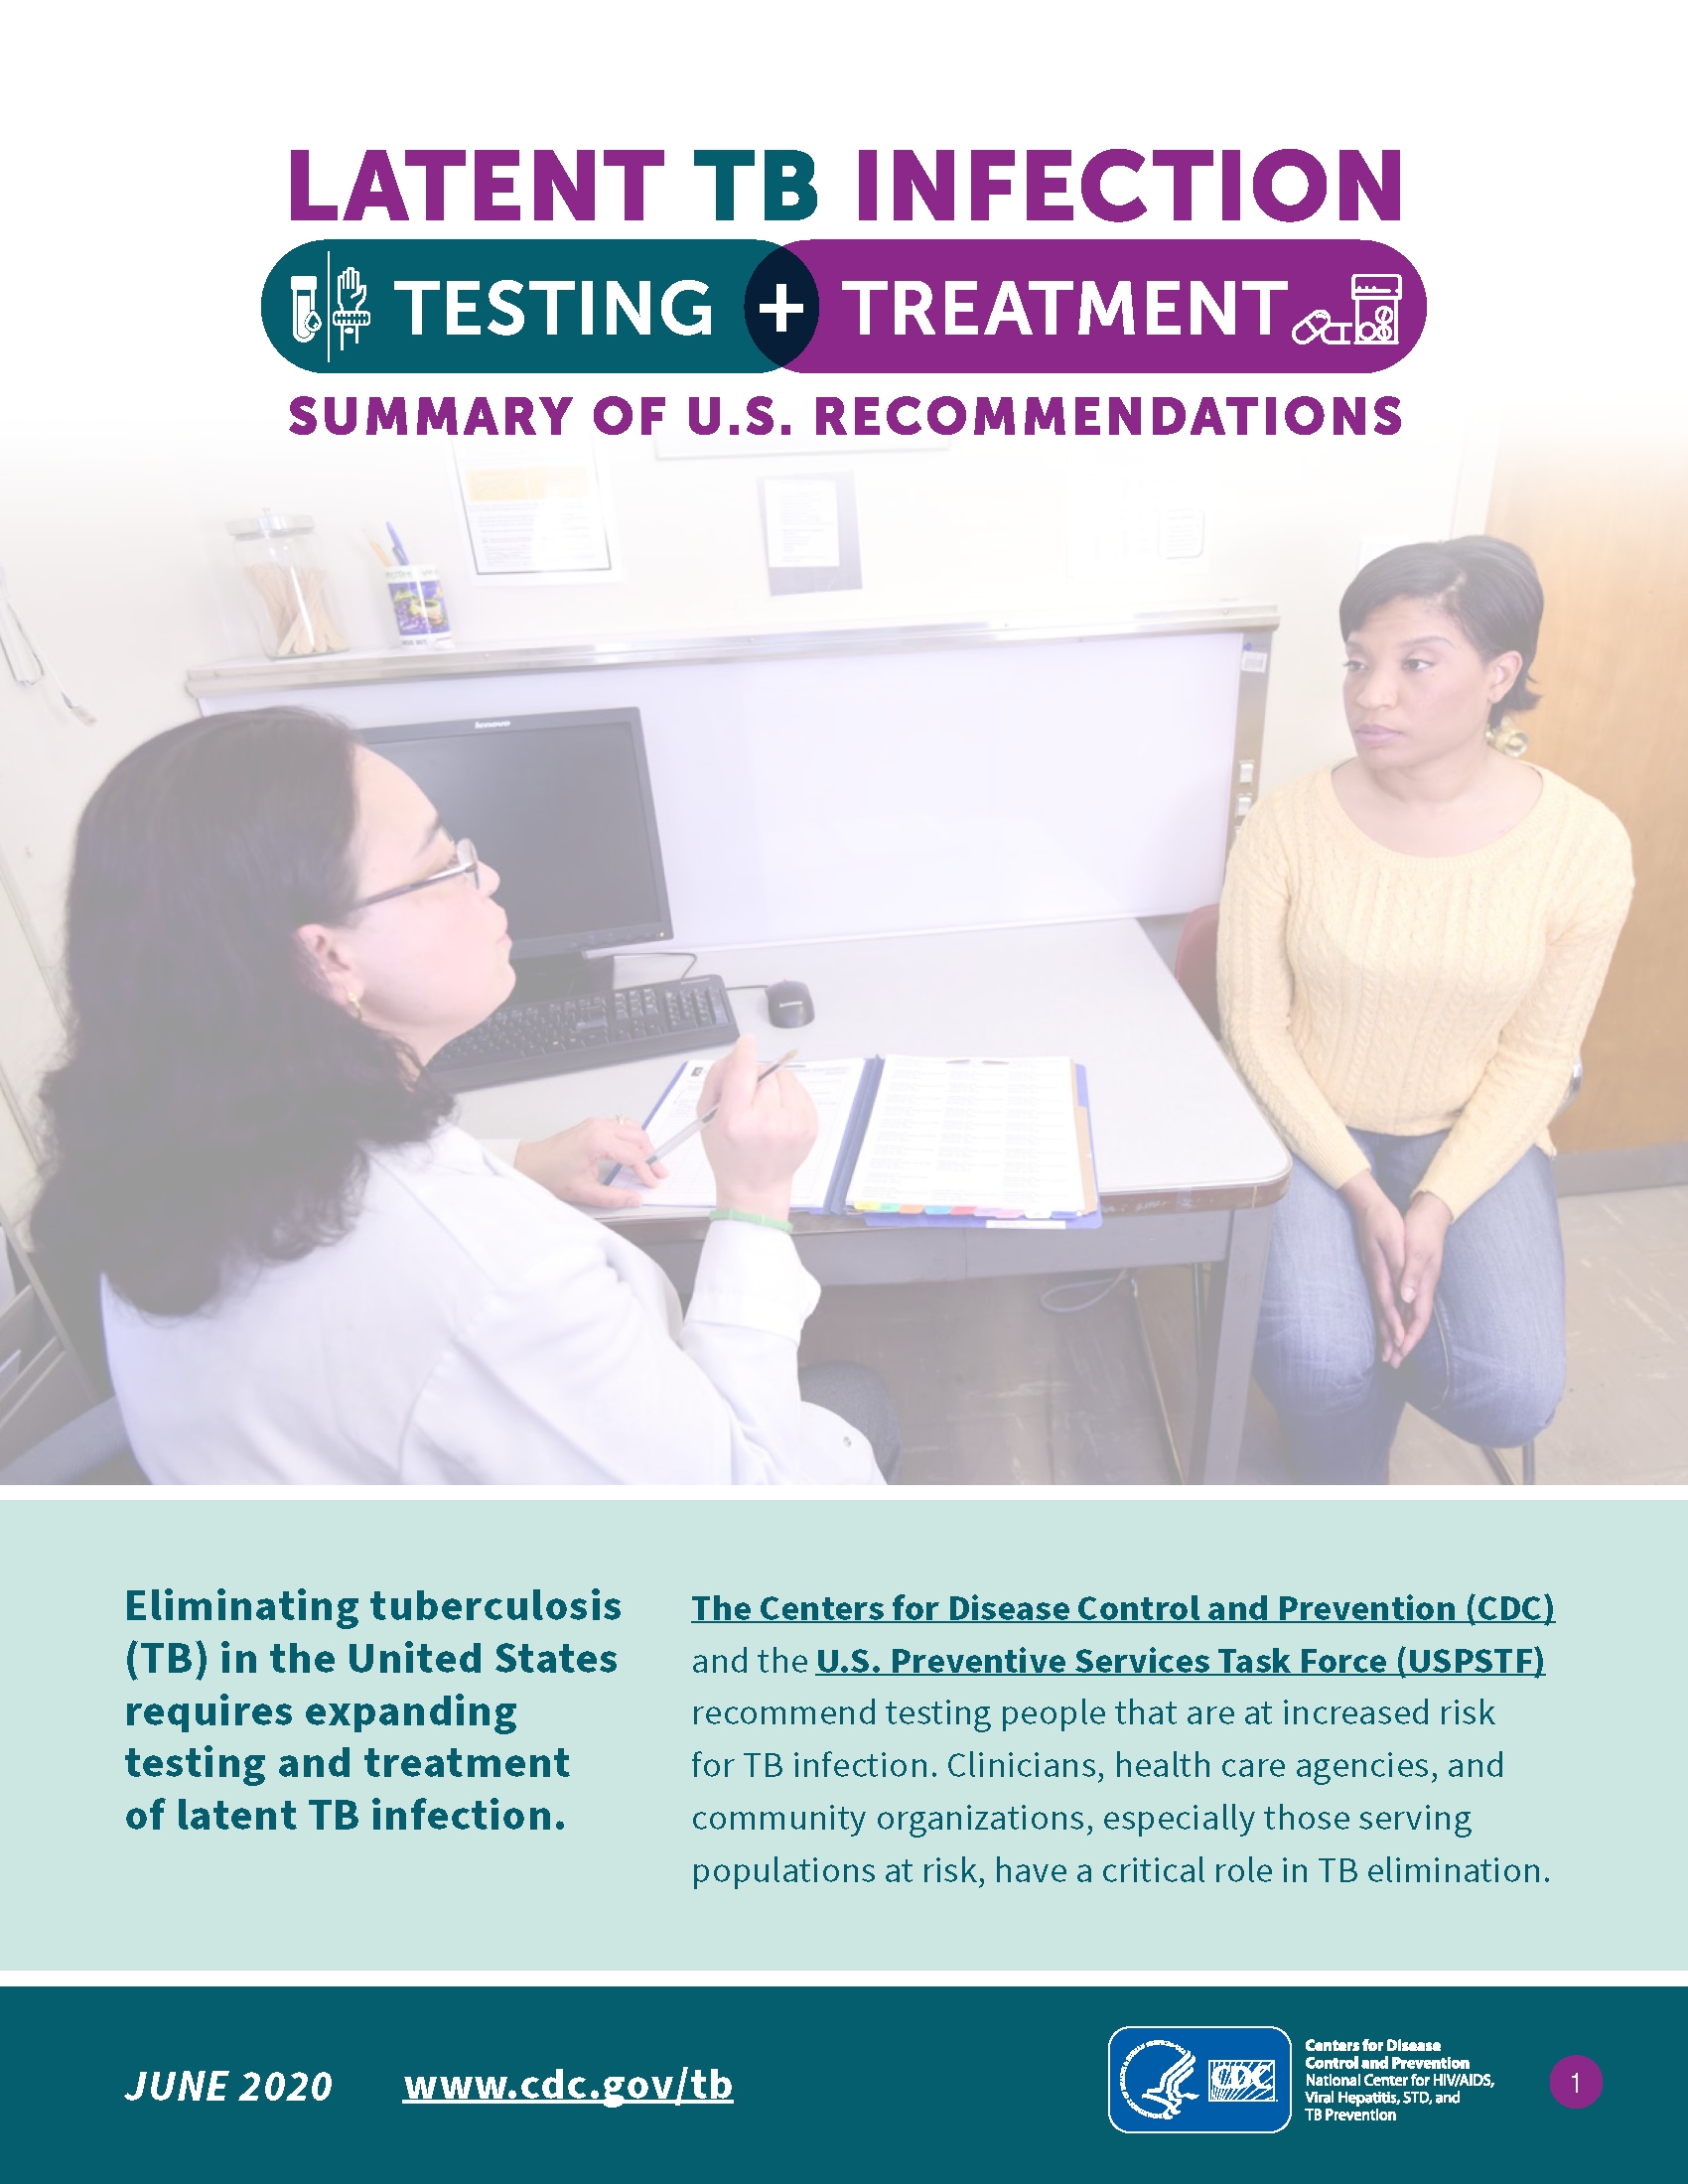 Latent TB Infection Testing and Treatment: Summary of U.S. Recommendations